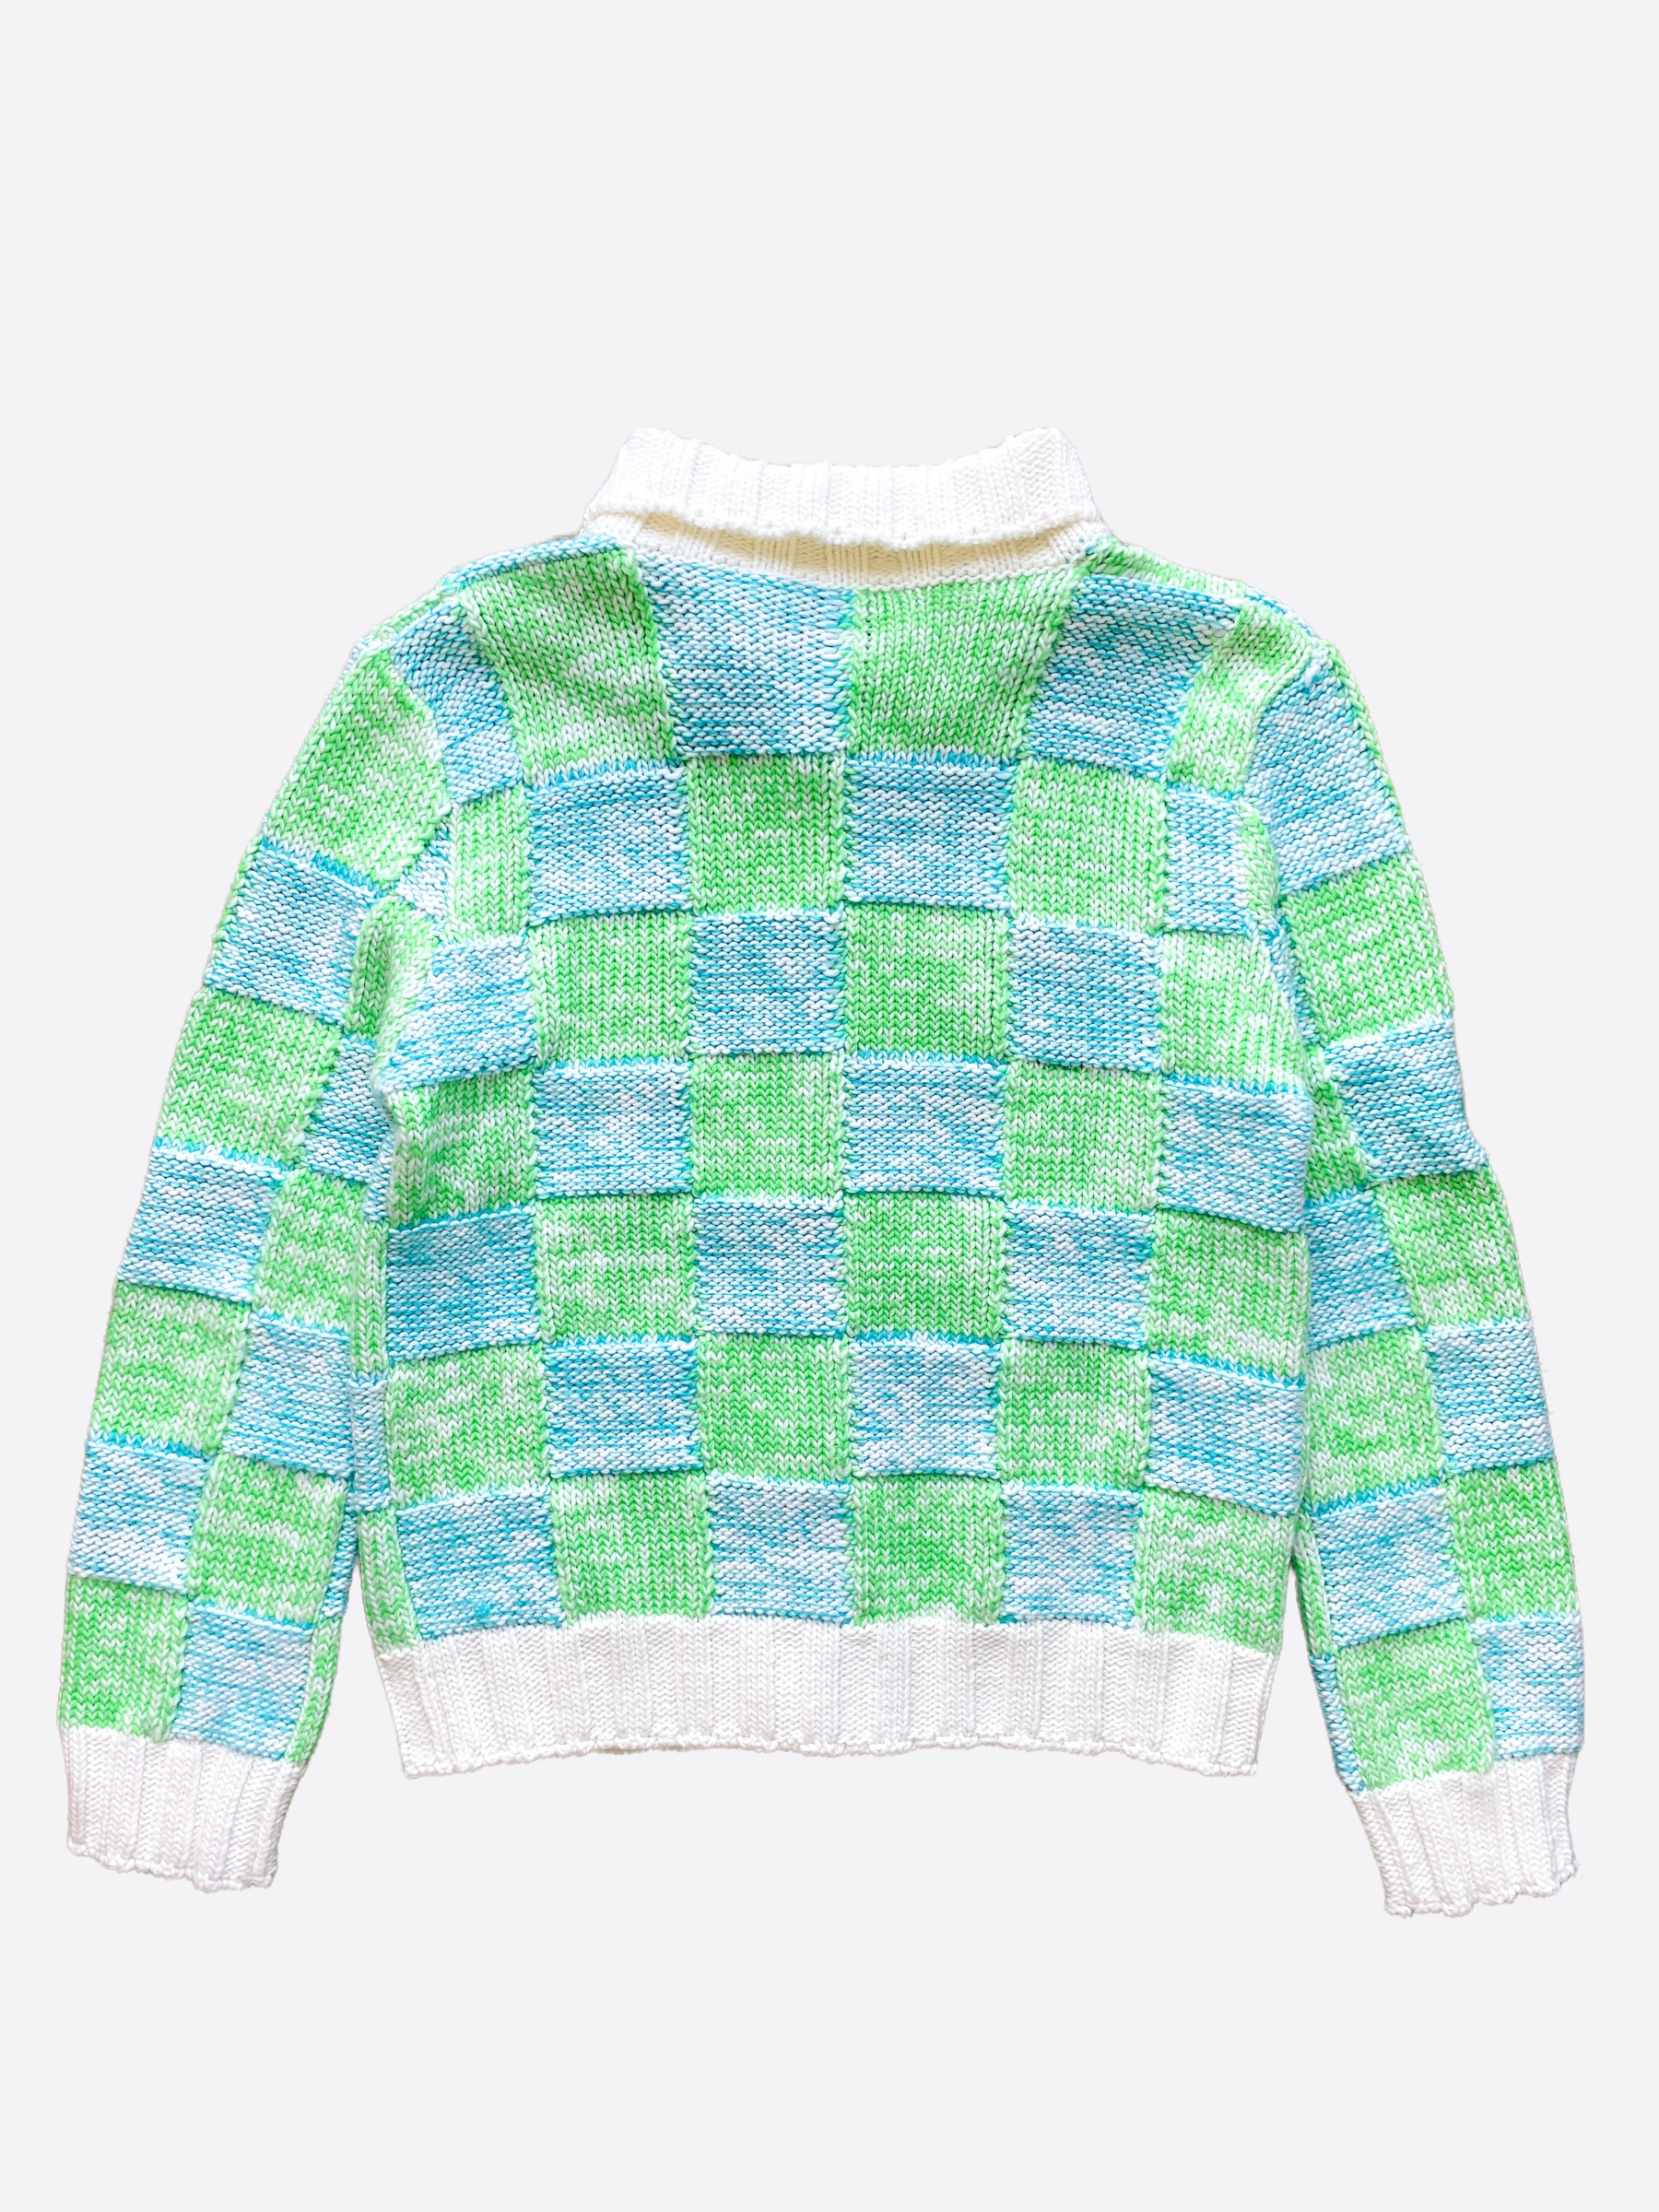 blue and green louis vuitton sweater